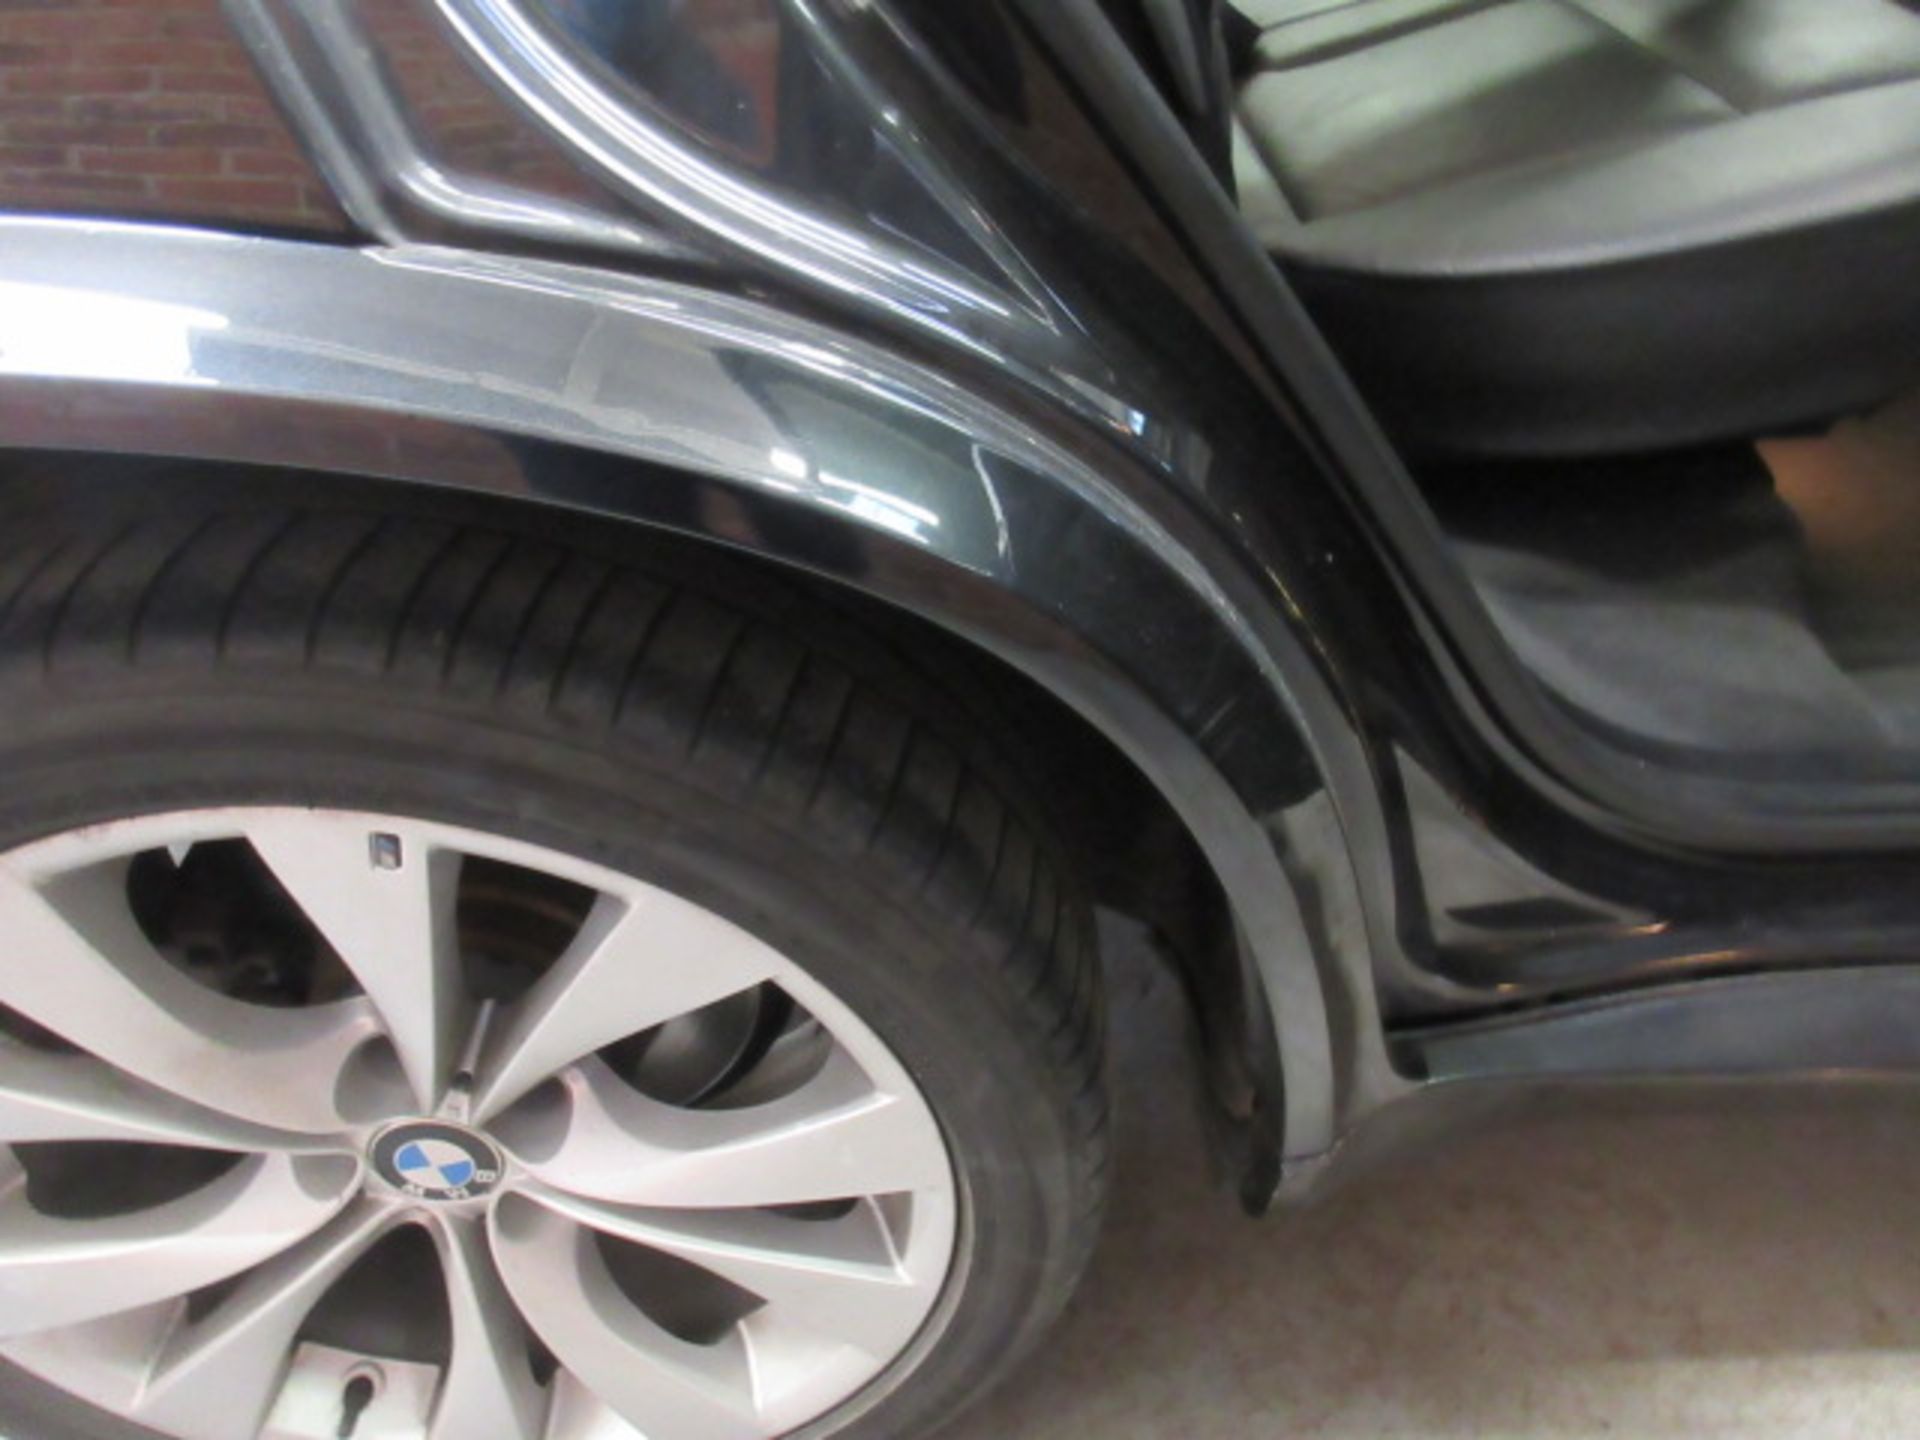 10 10 BMW X5 M Sport 7 Seater - Image 7 of 32